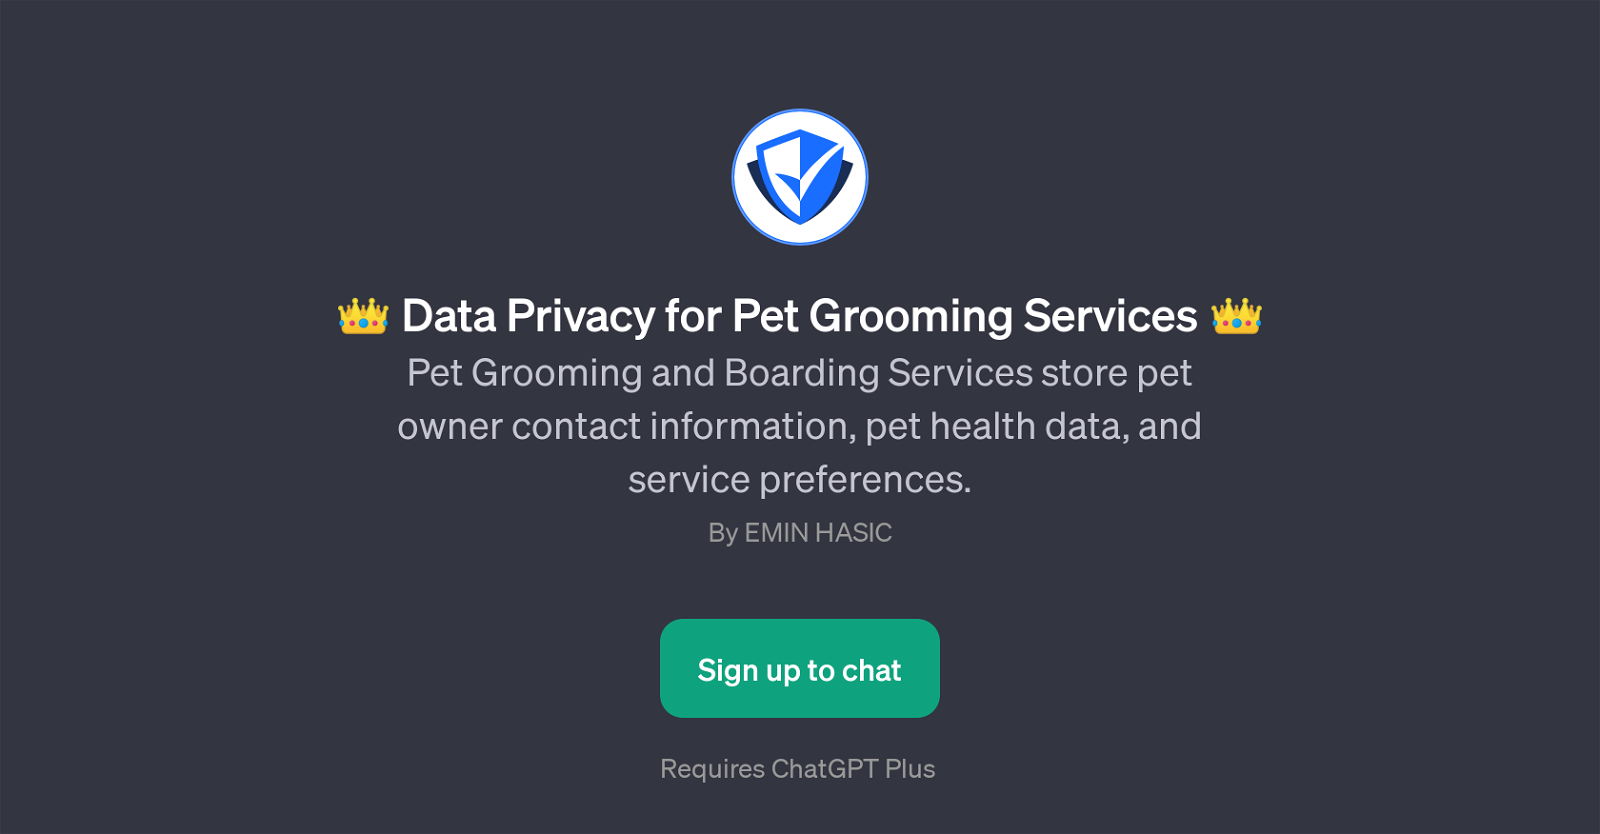 Data Privacy for Pet Grooming Services GPT website